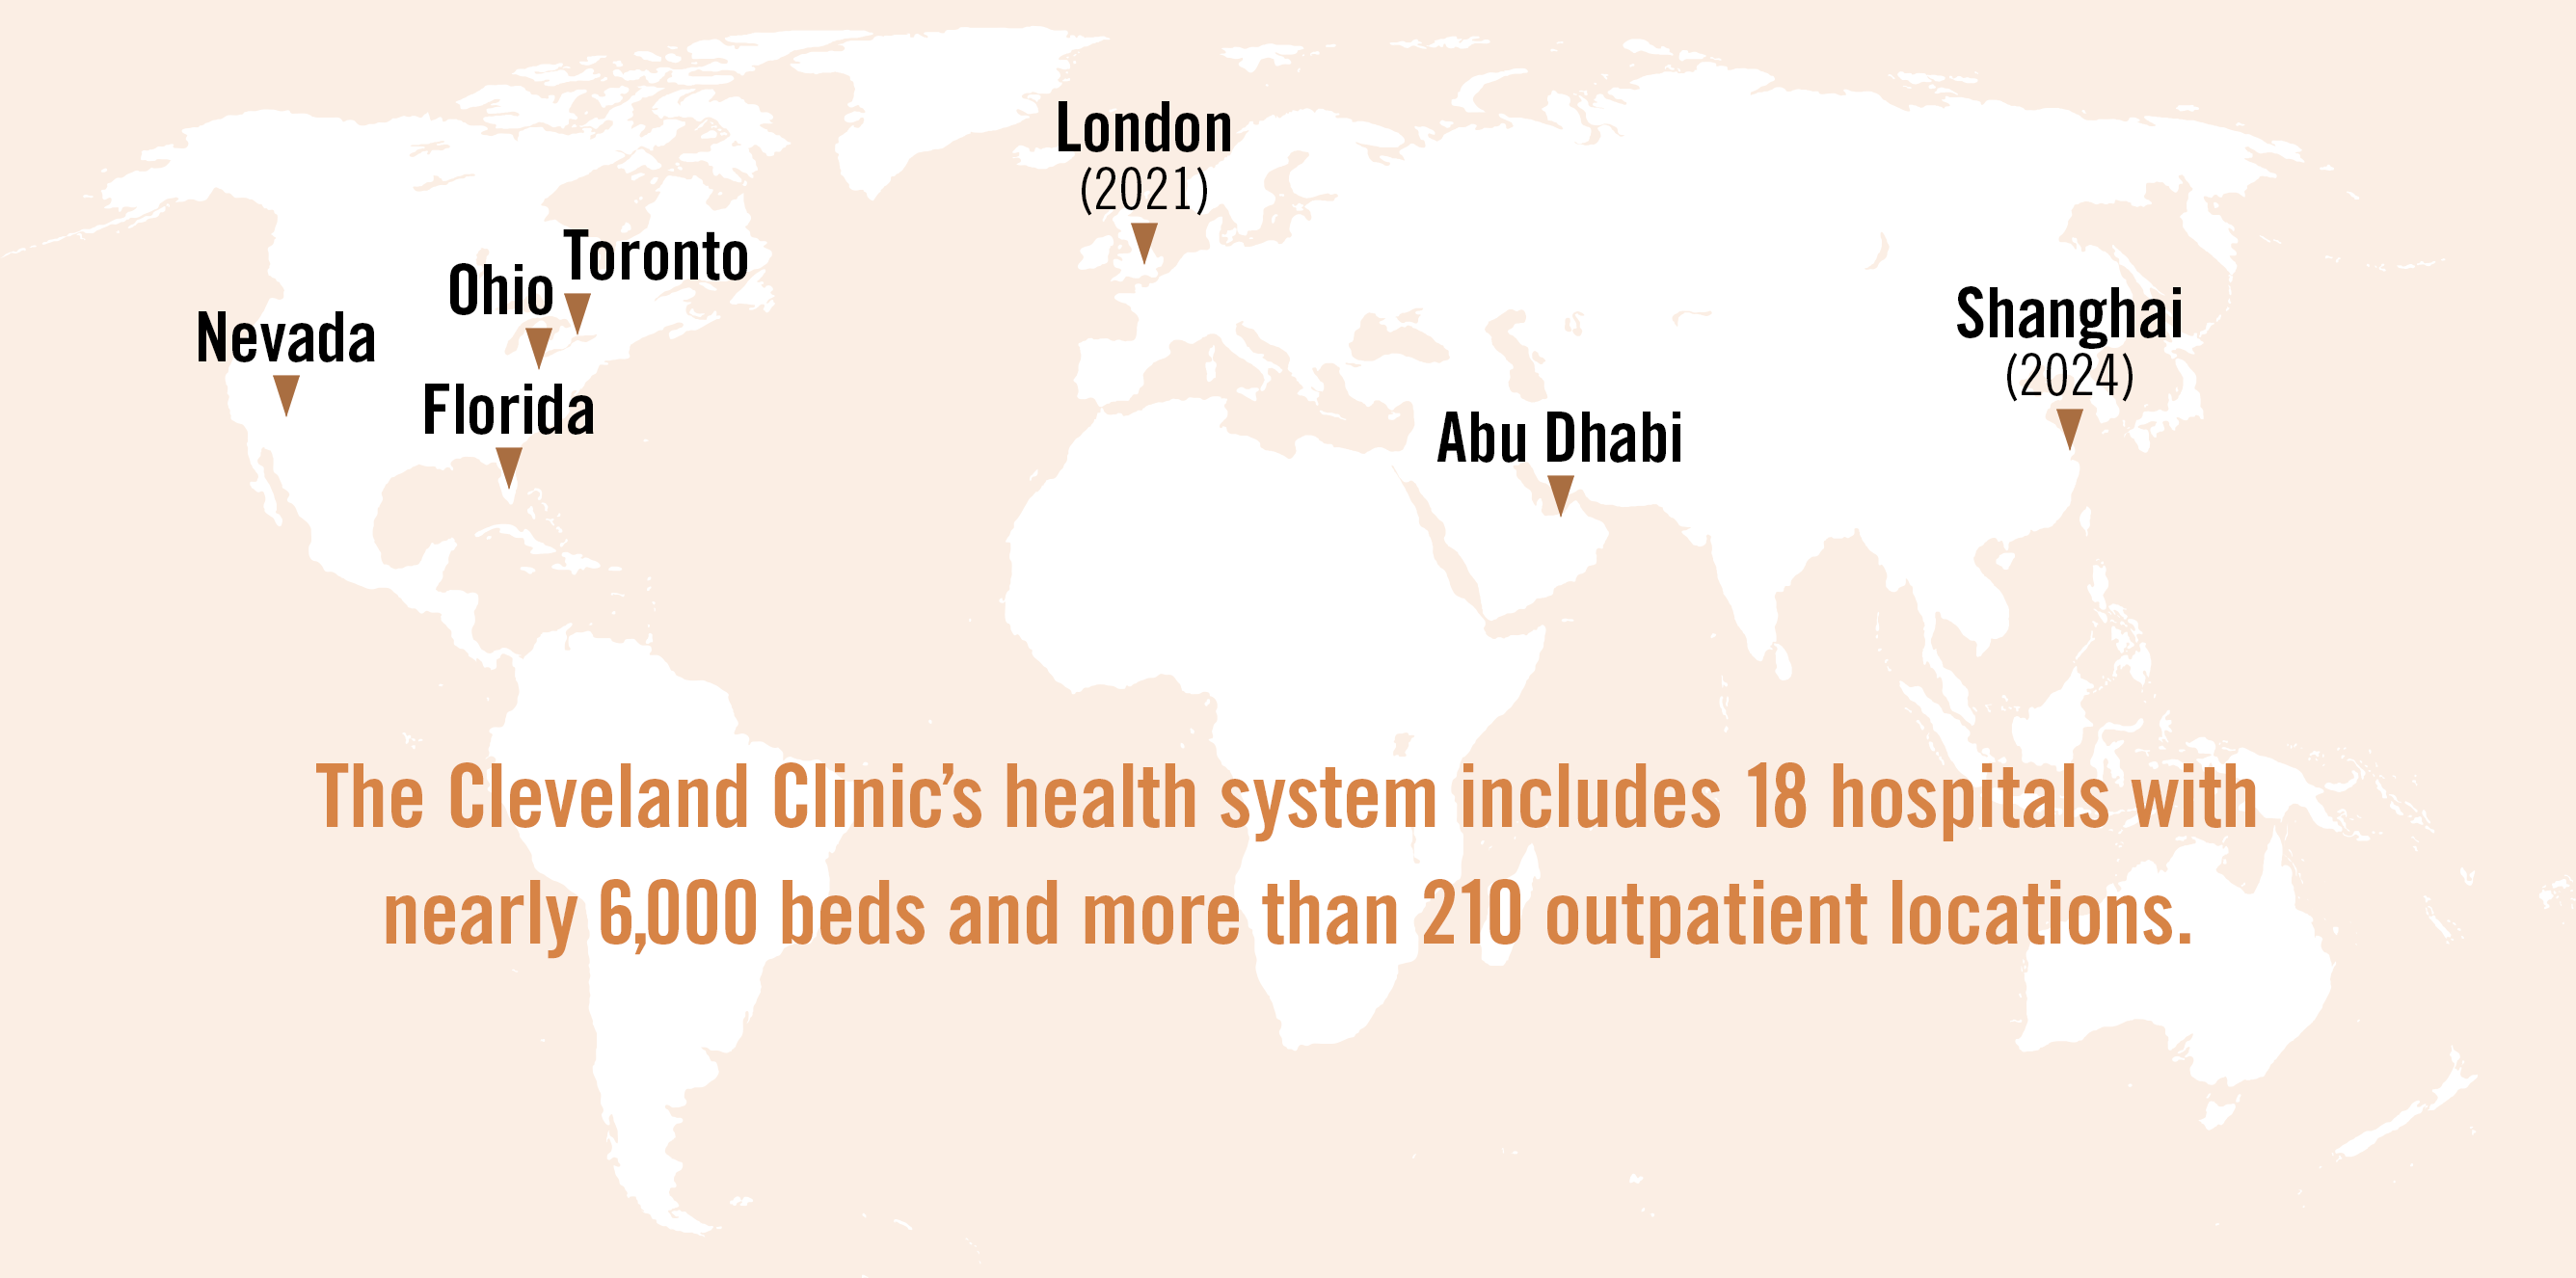 World map showing locations in Nevada, Ohio, Toronto, Florida, London (2021), Abu Dhabi, and Shanghai (2024). The Cleveland Clinic’s health system includes 18 hospitals with nearly 6,000 beds and more than 210 outpatient locations.